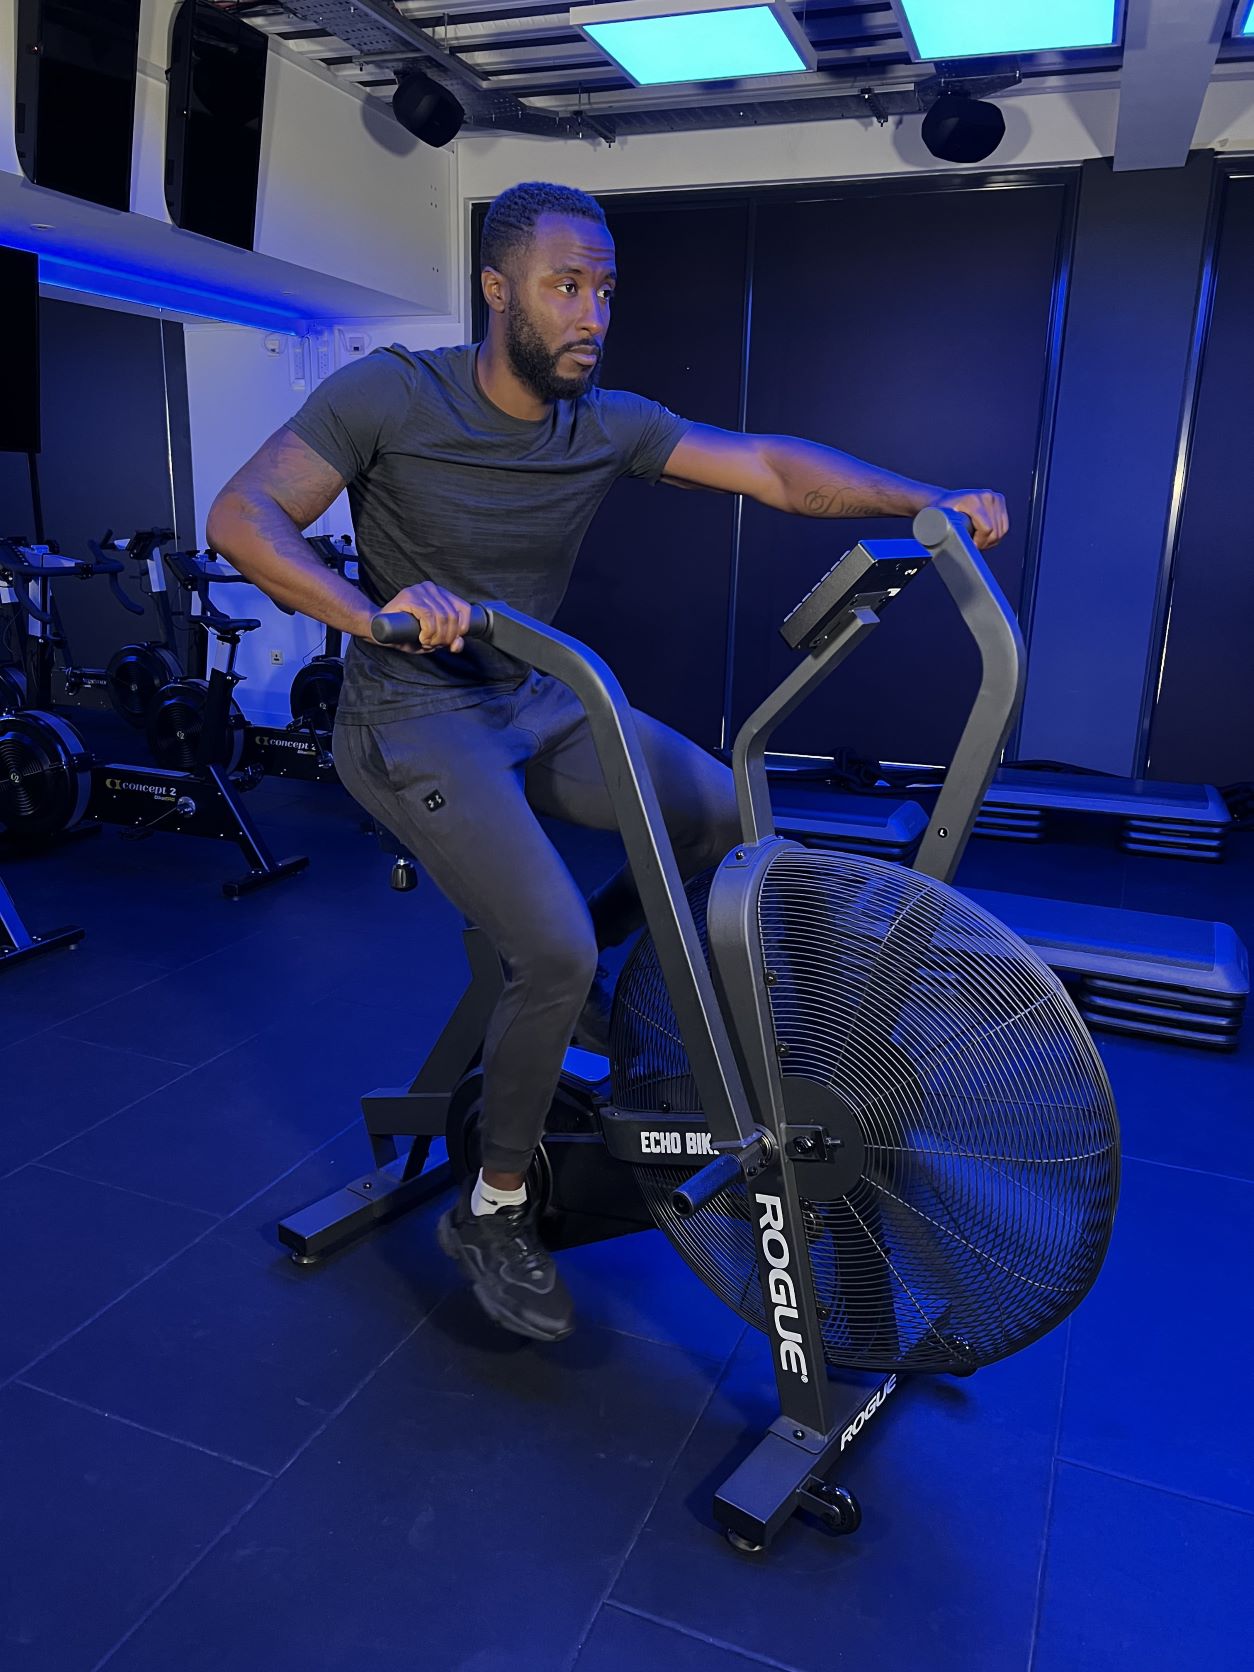 man demonstrates how to use an air bike; he sits on the bike with his legs pedalling and arms pushing and pulling the two handles in opposite directions